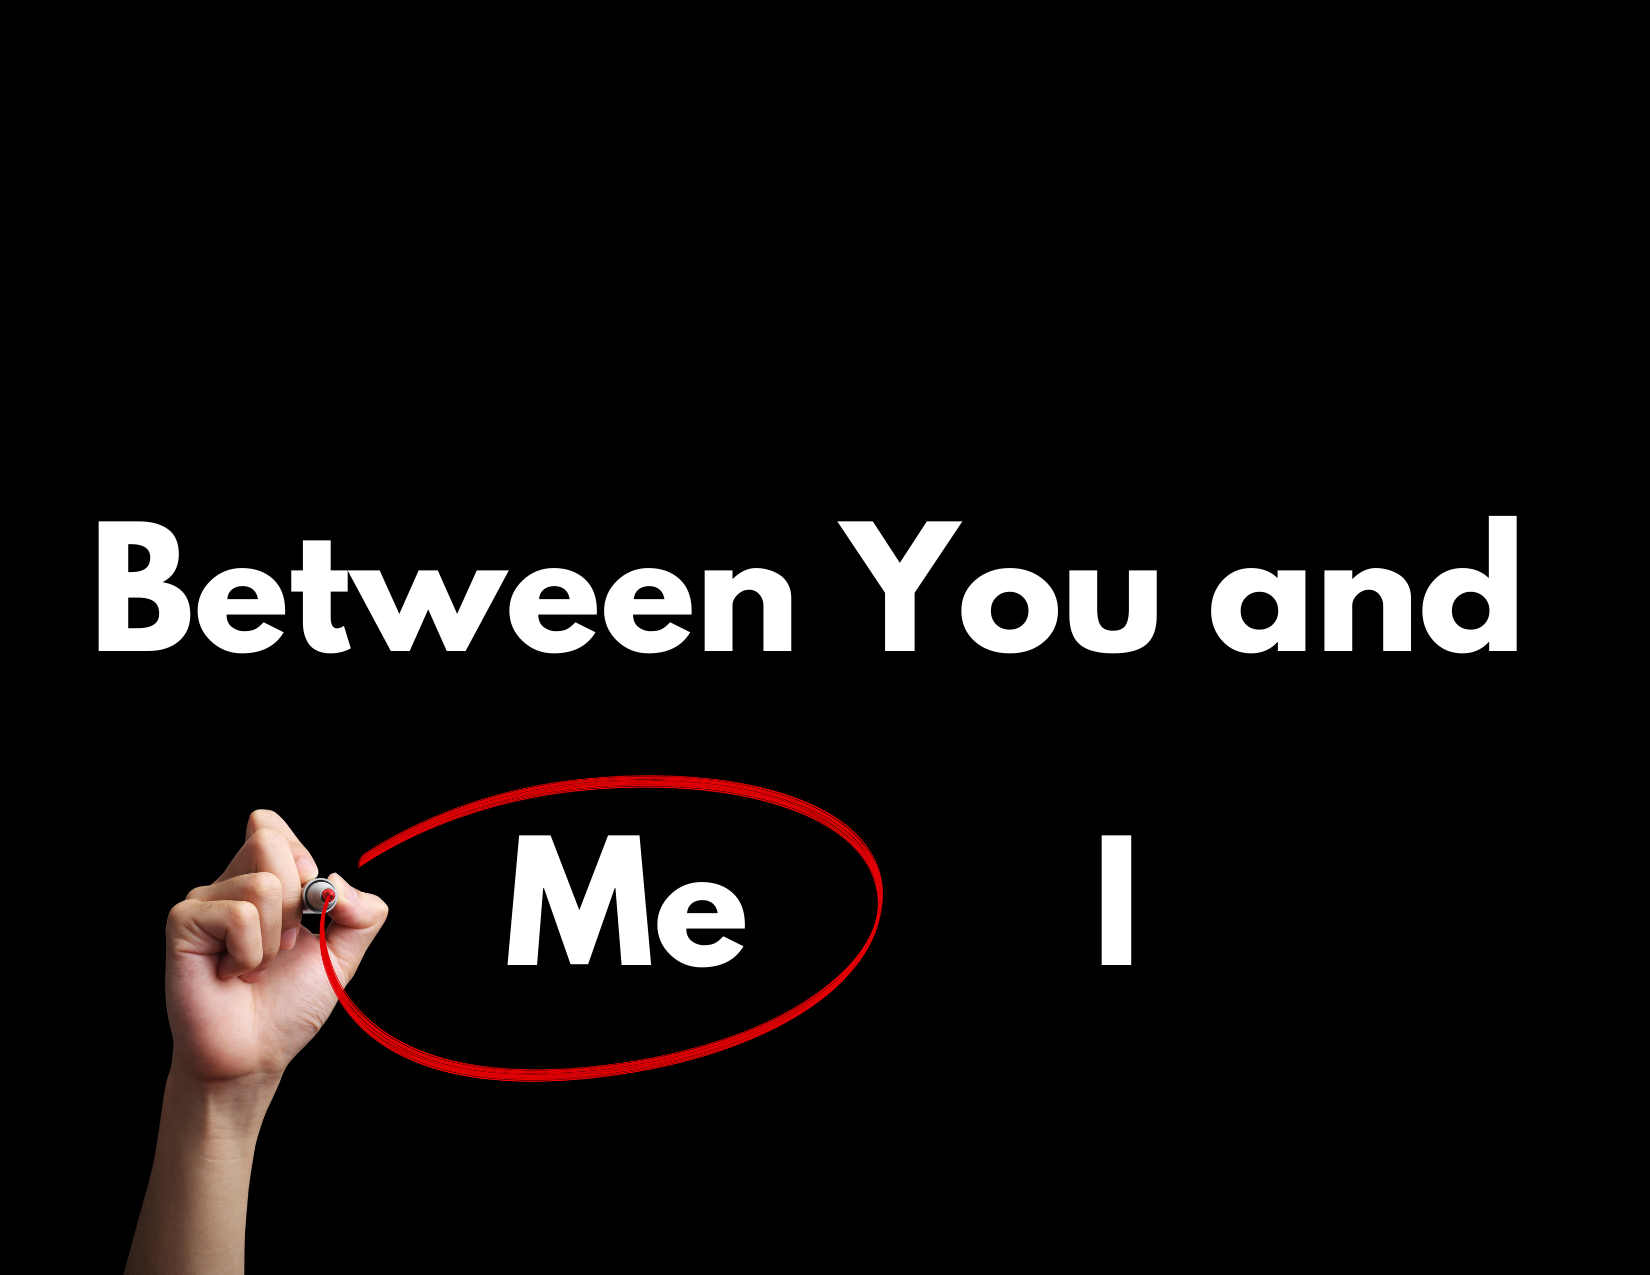 Black background with the words: "Between You and I or Me" and the word "Me" circled in red as the correct answer